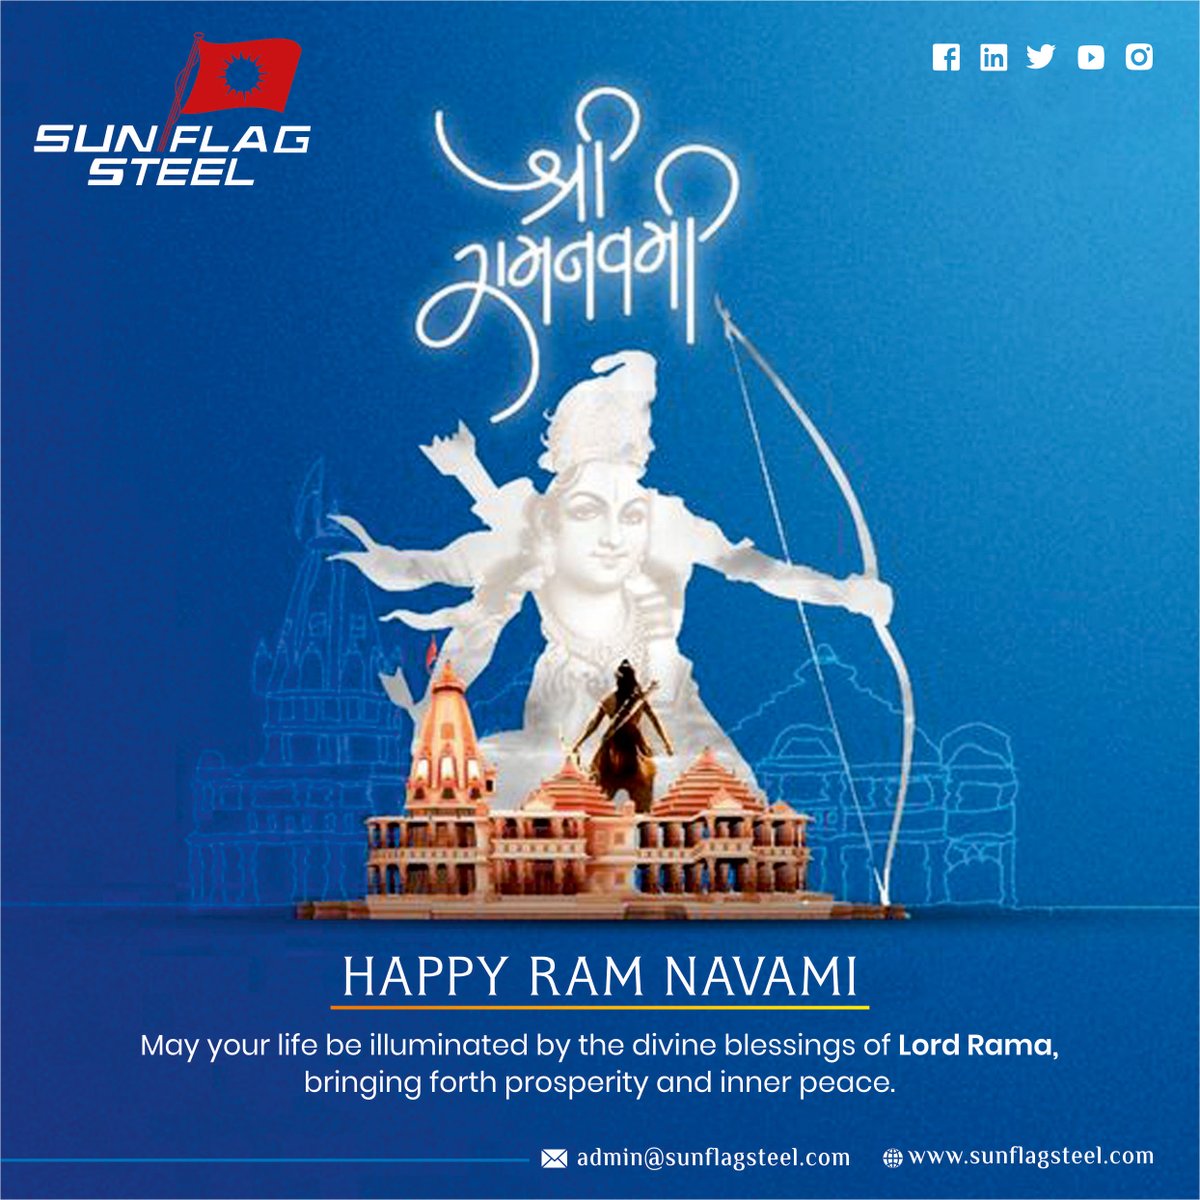 May #LordRama's blessings fill your life with prosperity, harmony, and inner peace. Warm wishes from the #SunflagSteel family. #RamNavami #RamNavami2024 #DivineBlessings #FestivalVibes #HarmonyAndPeace #BlessingsOfRama #Blessings #InnerPeace #Prosperity #Harmony #Sunflag #Steel